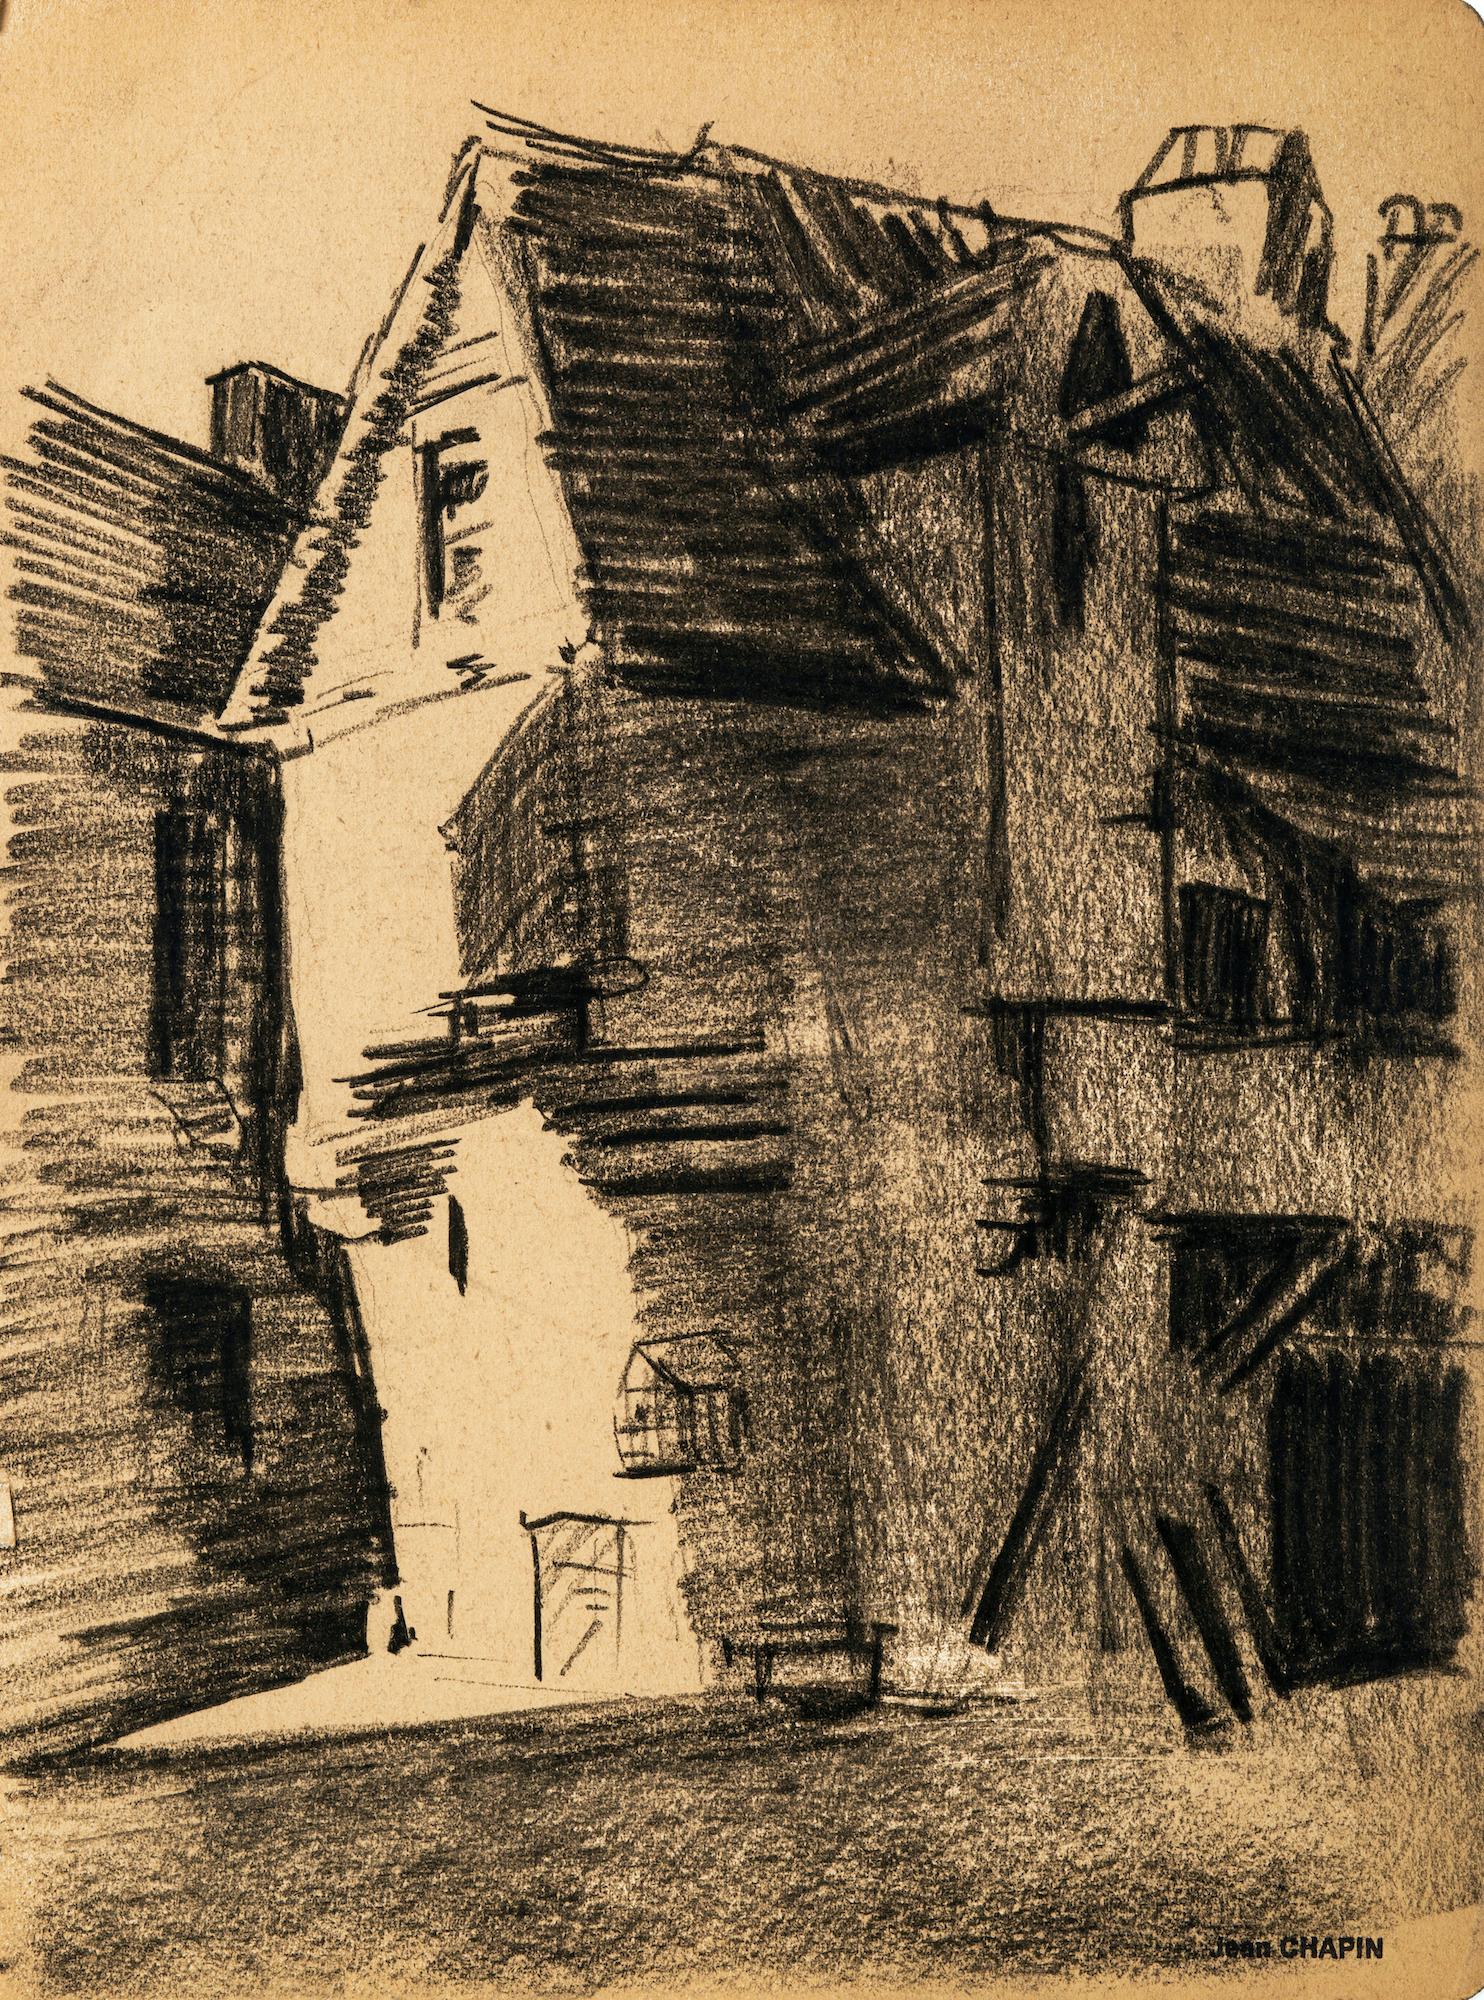 The Village - Charcoal Drawing by Jean Chapin - Early 1900